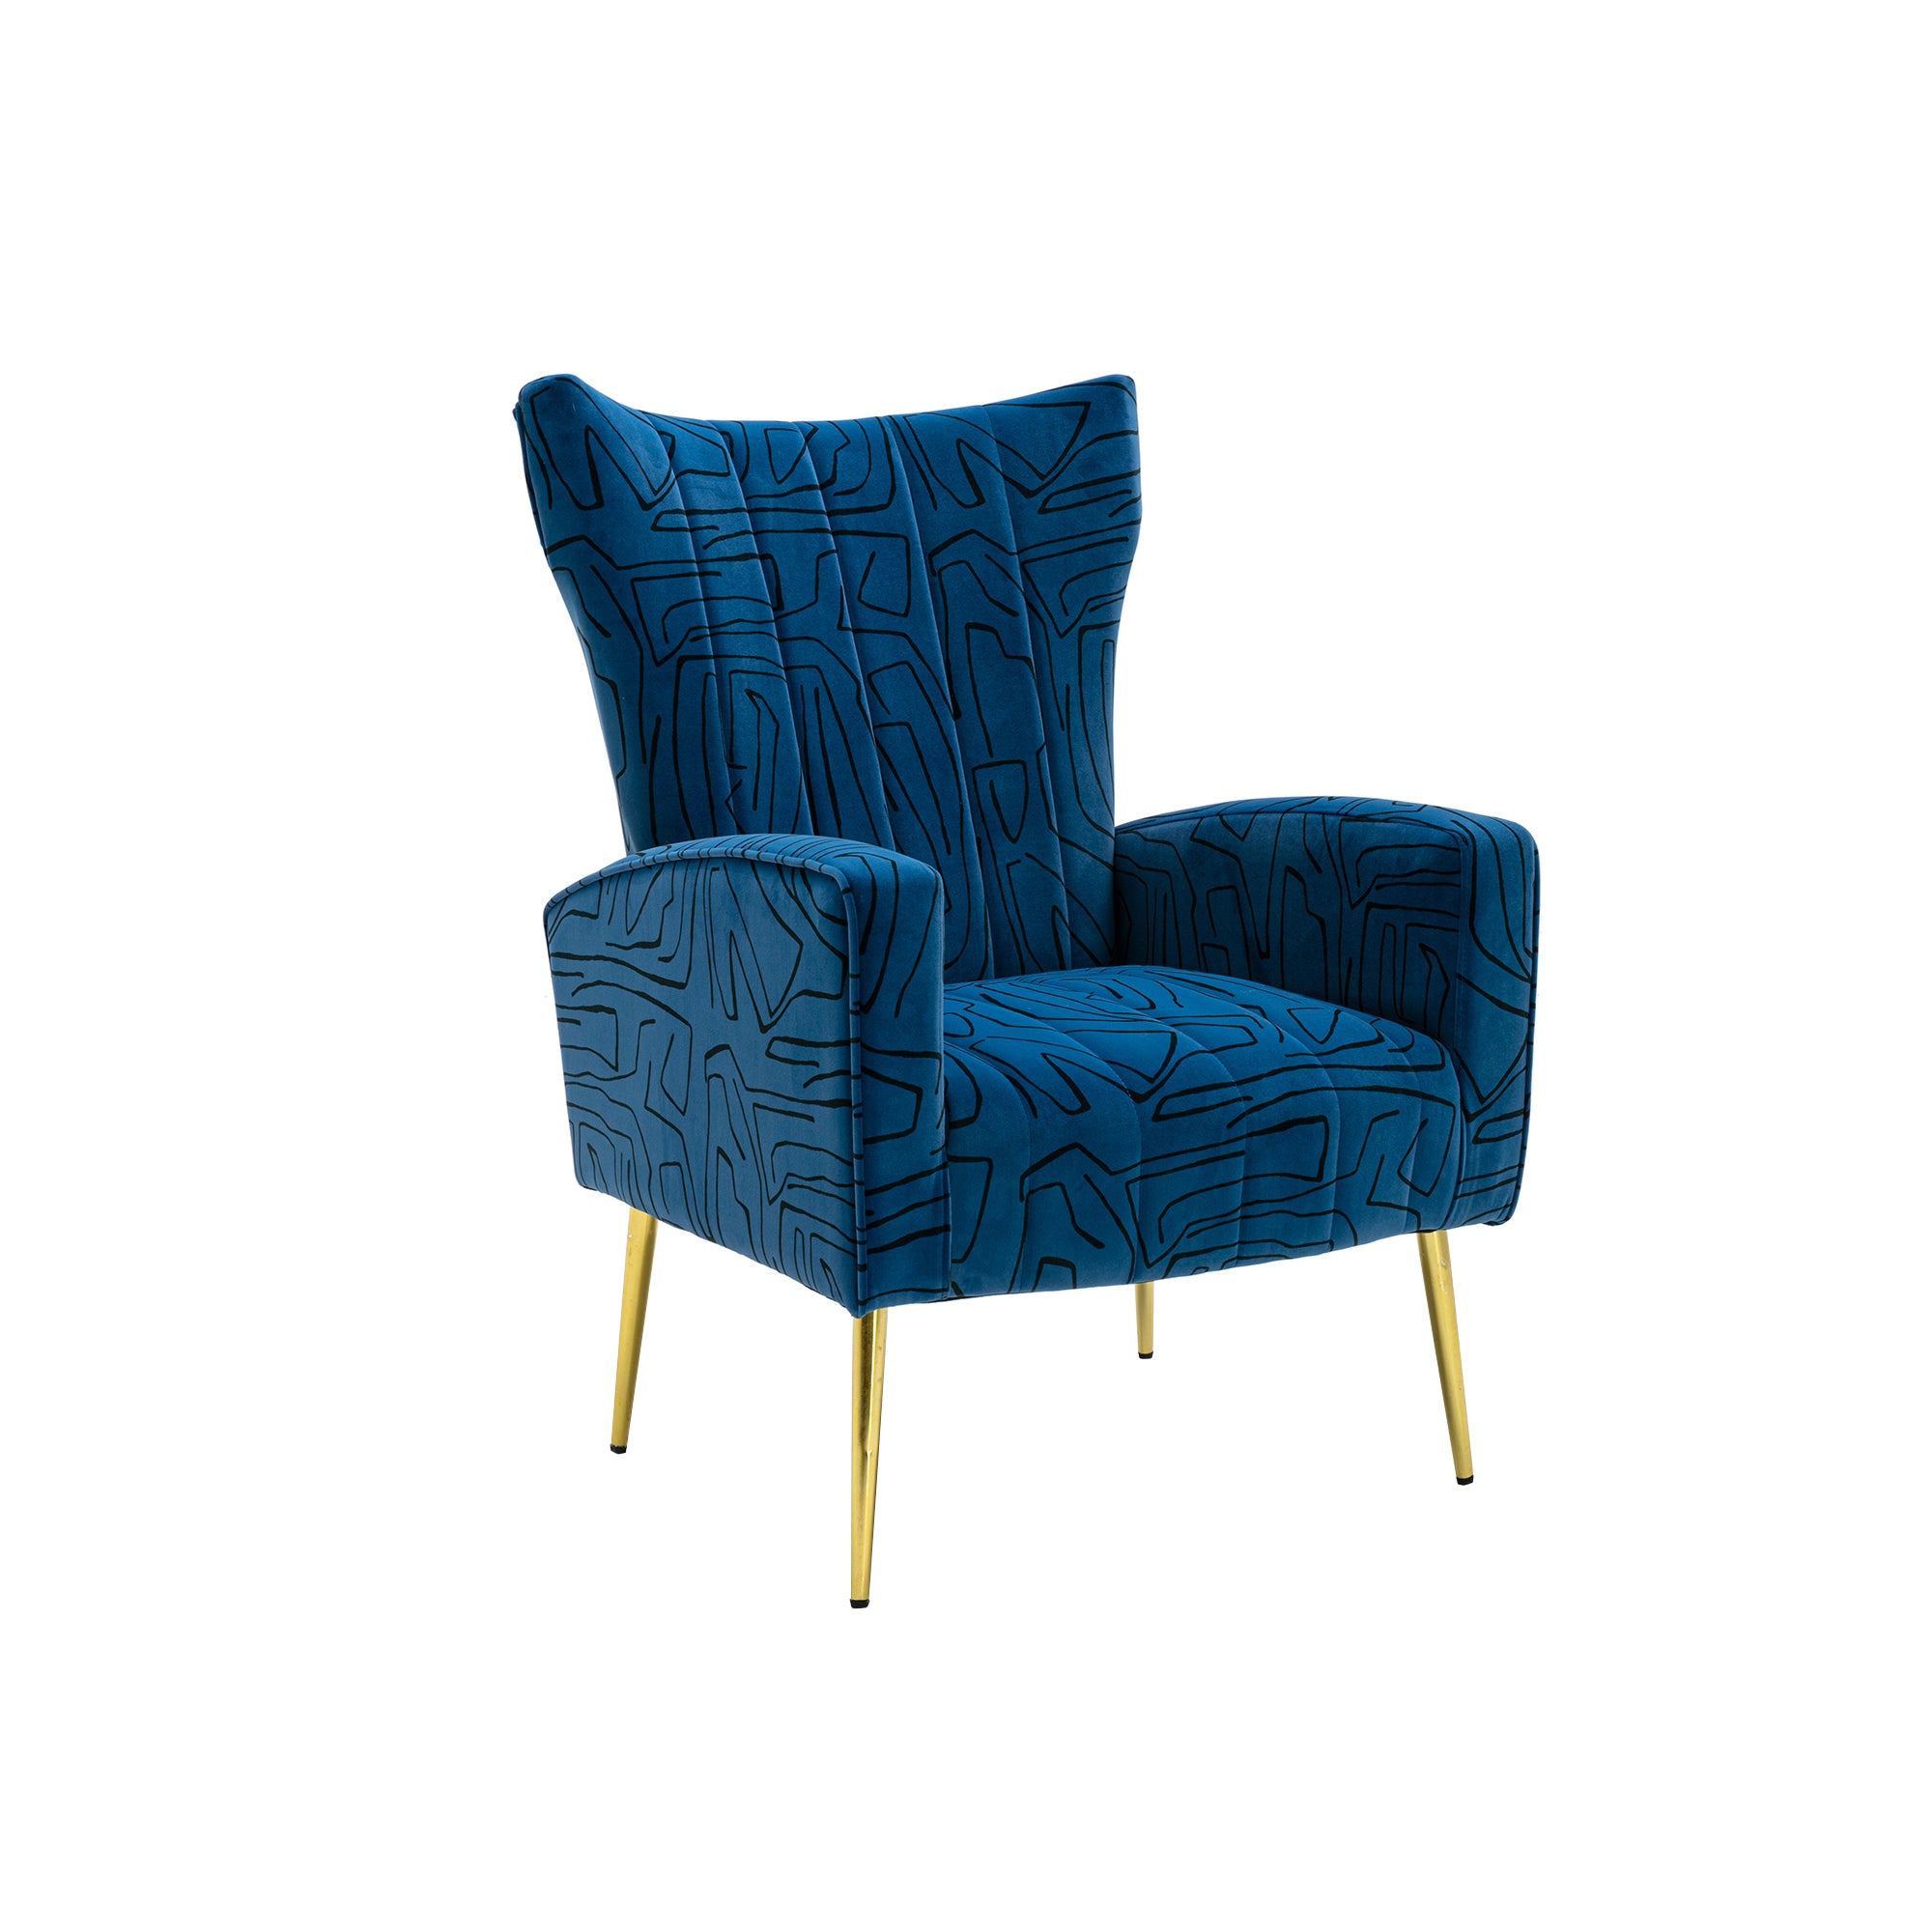 COOLMORE Accent Chair ,leisure single chair with Rose navy-metal